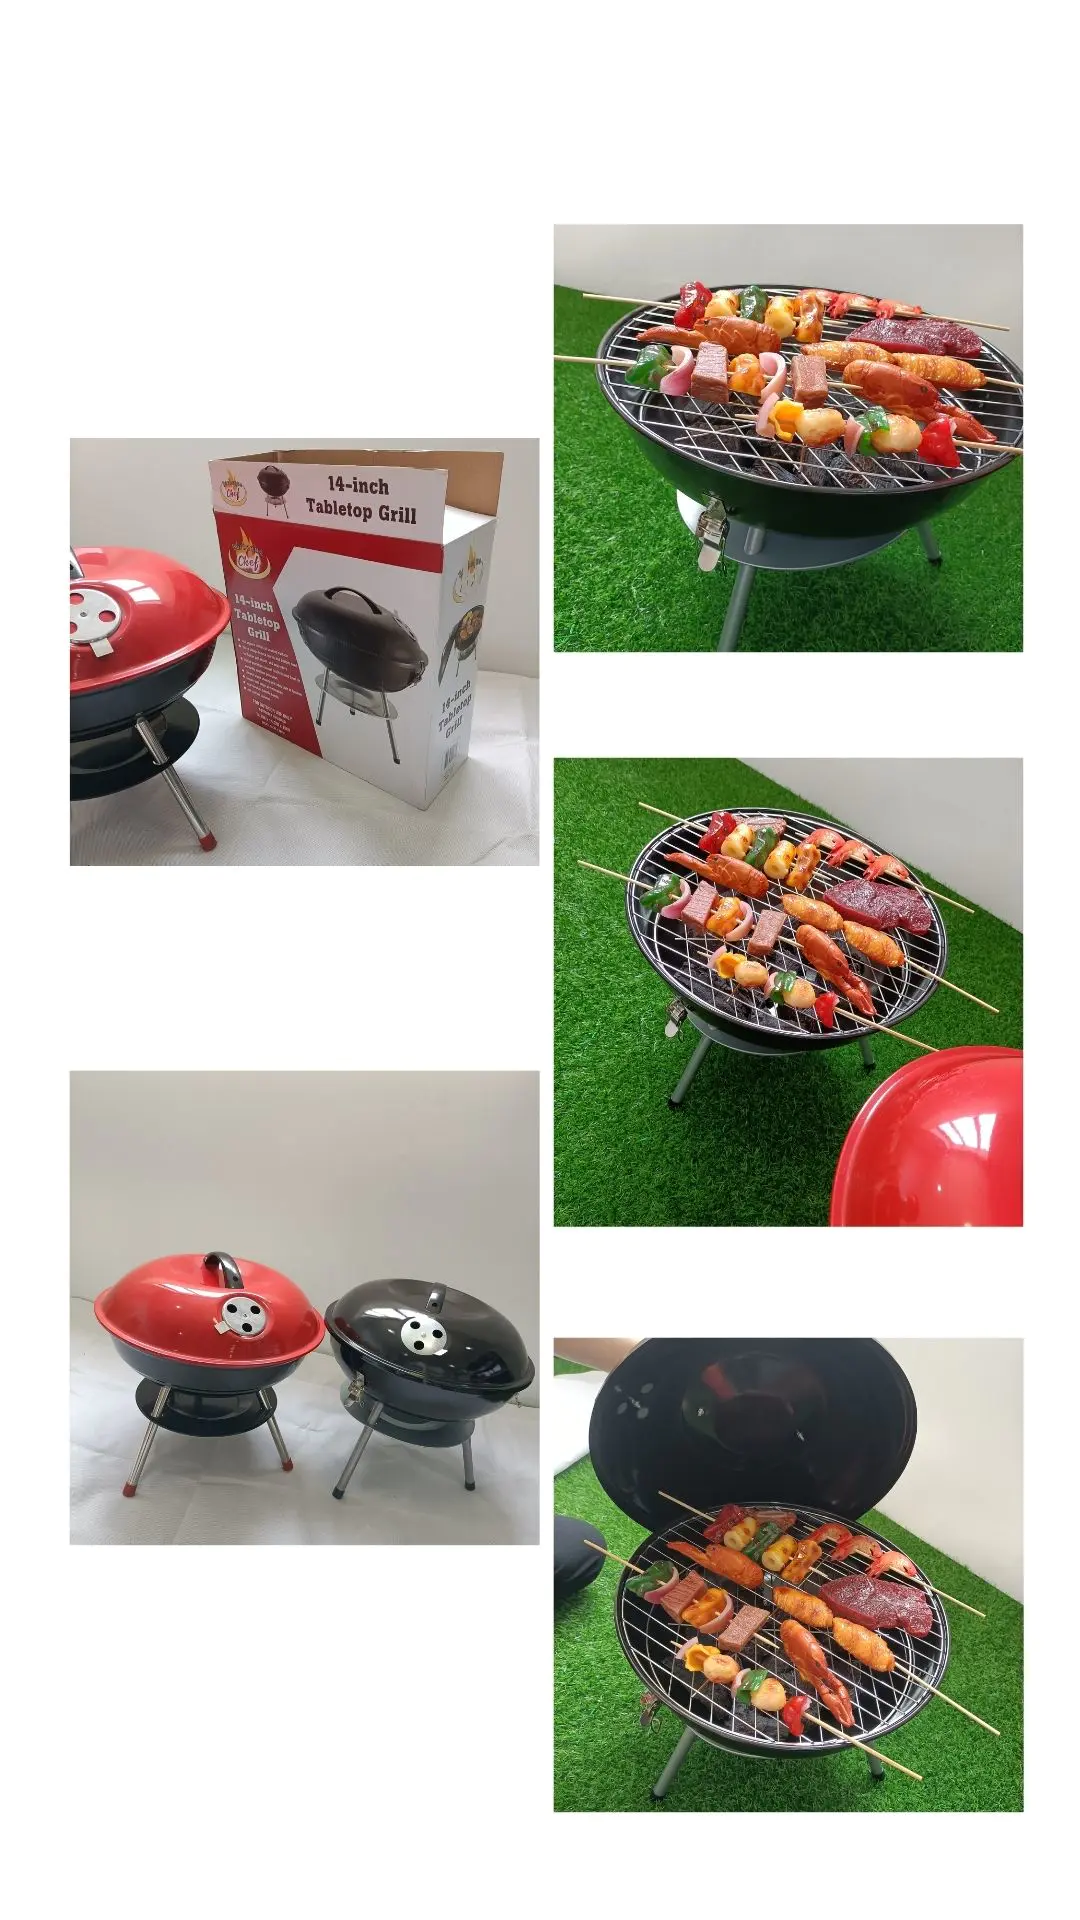 Longzhao BBQ small cheap charcoal grill high quality for camping